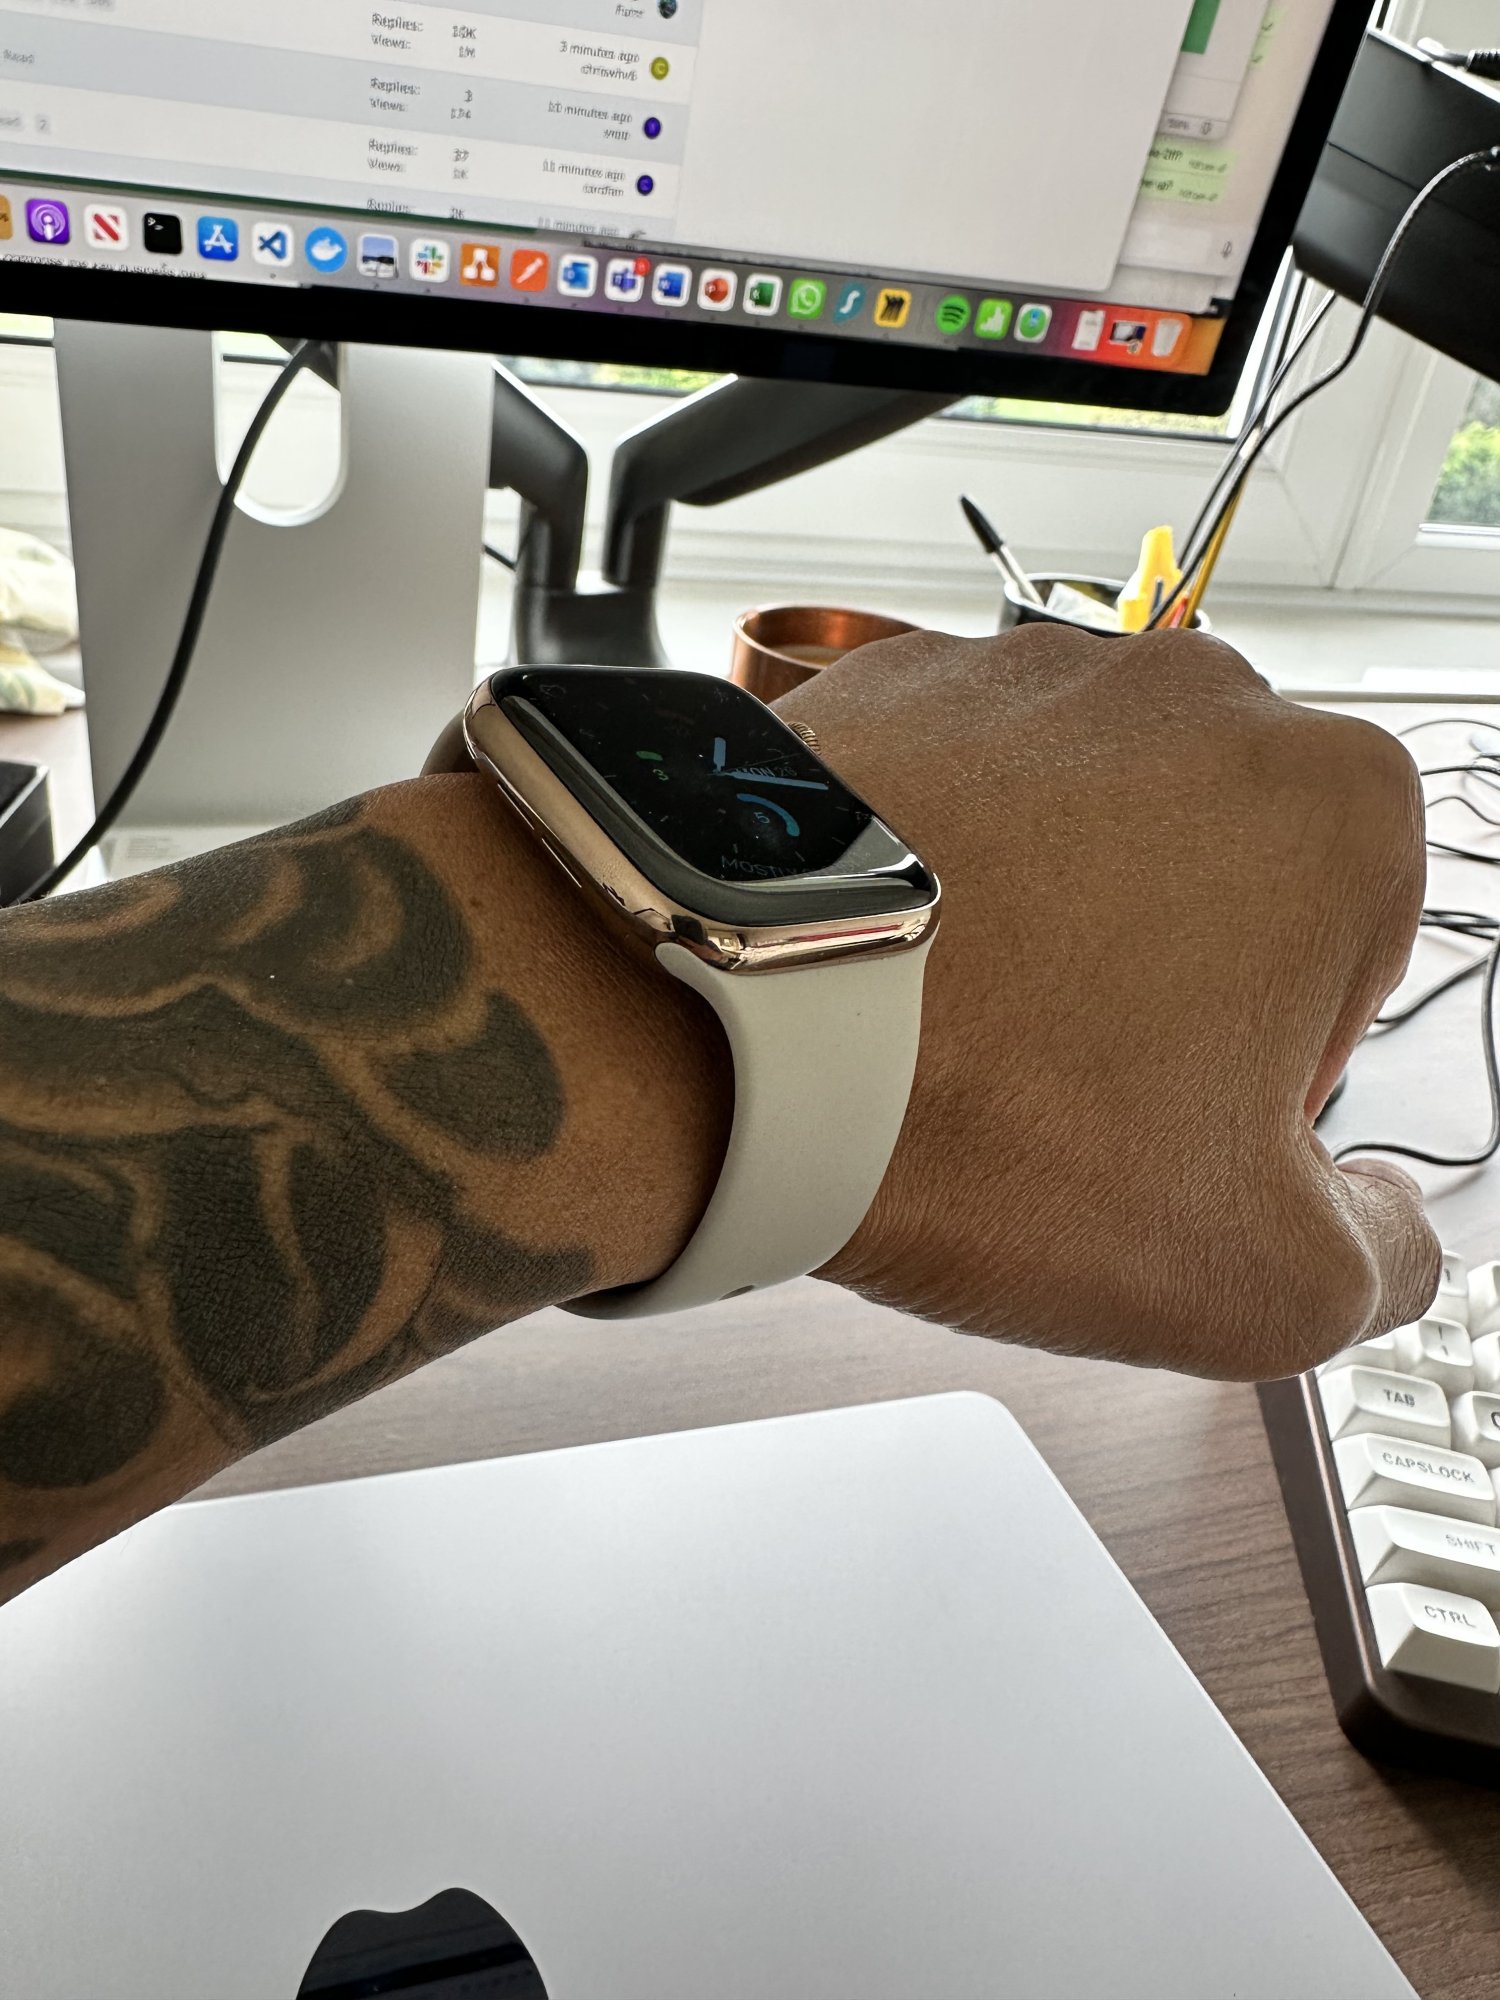 Show off your Apple Watch | Page 862 | MacRumors Forums